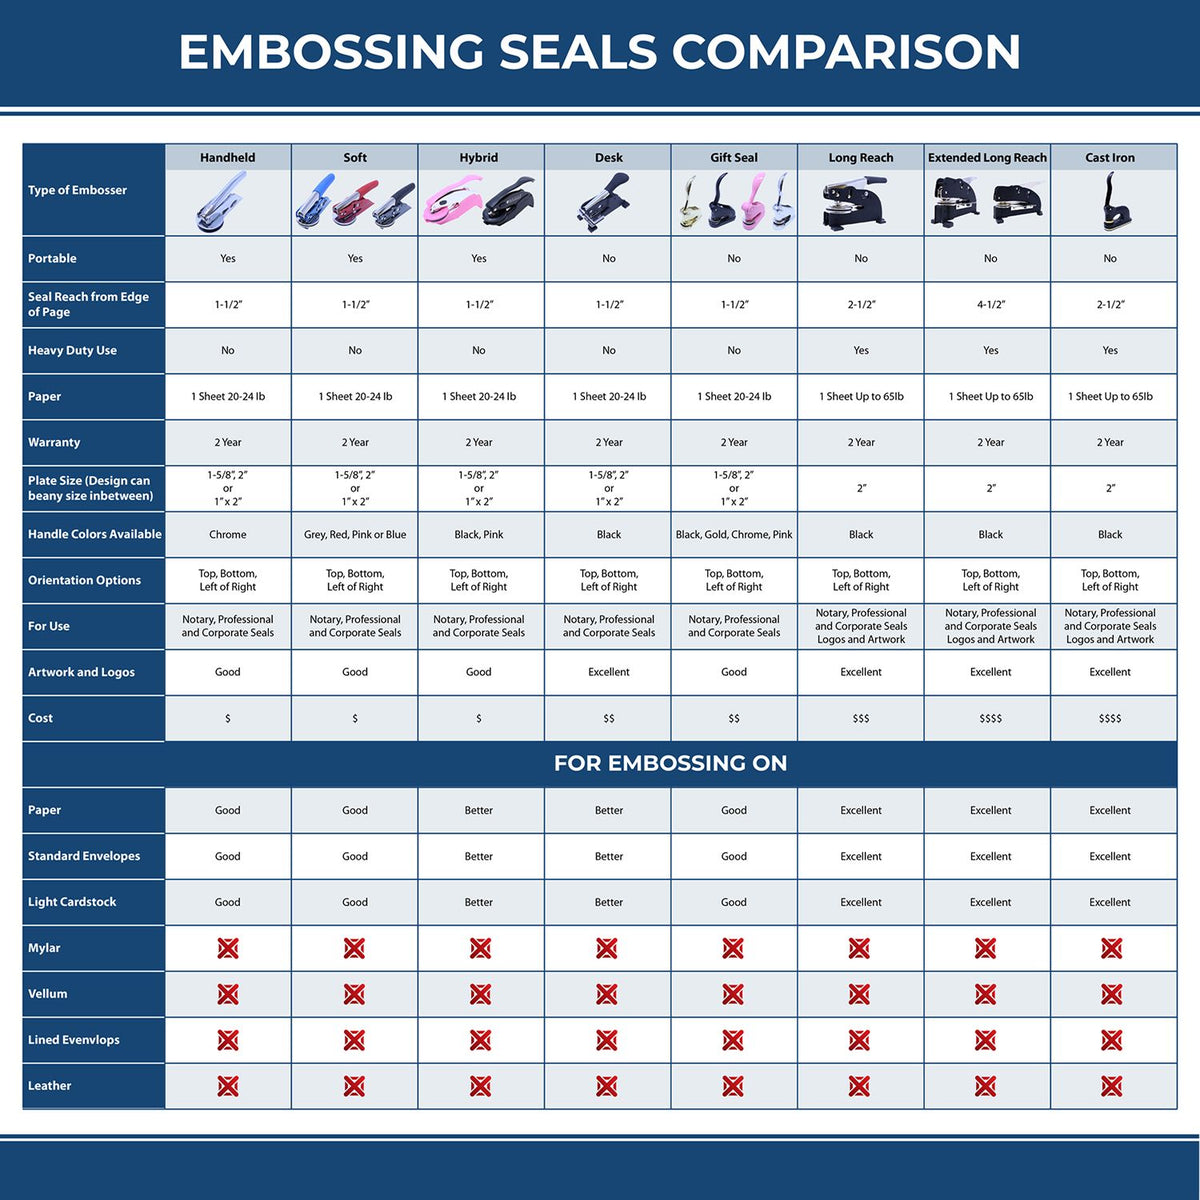 A comparison chart for the different types of mount models available for the Extended Long Reach Guam Surveyor Embosser.